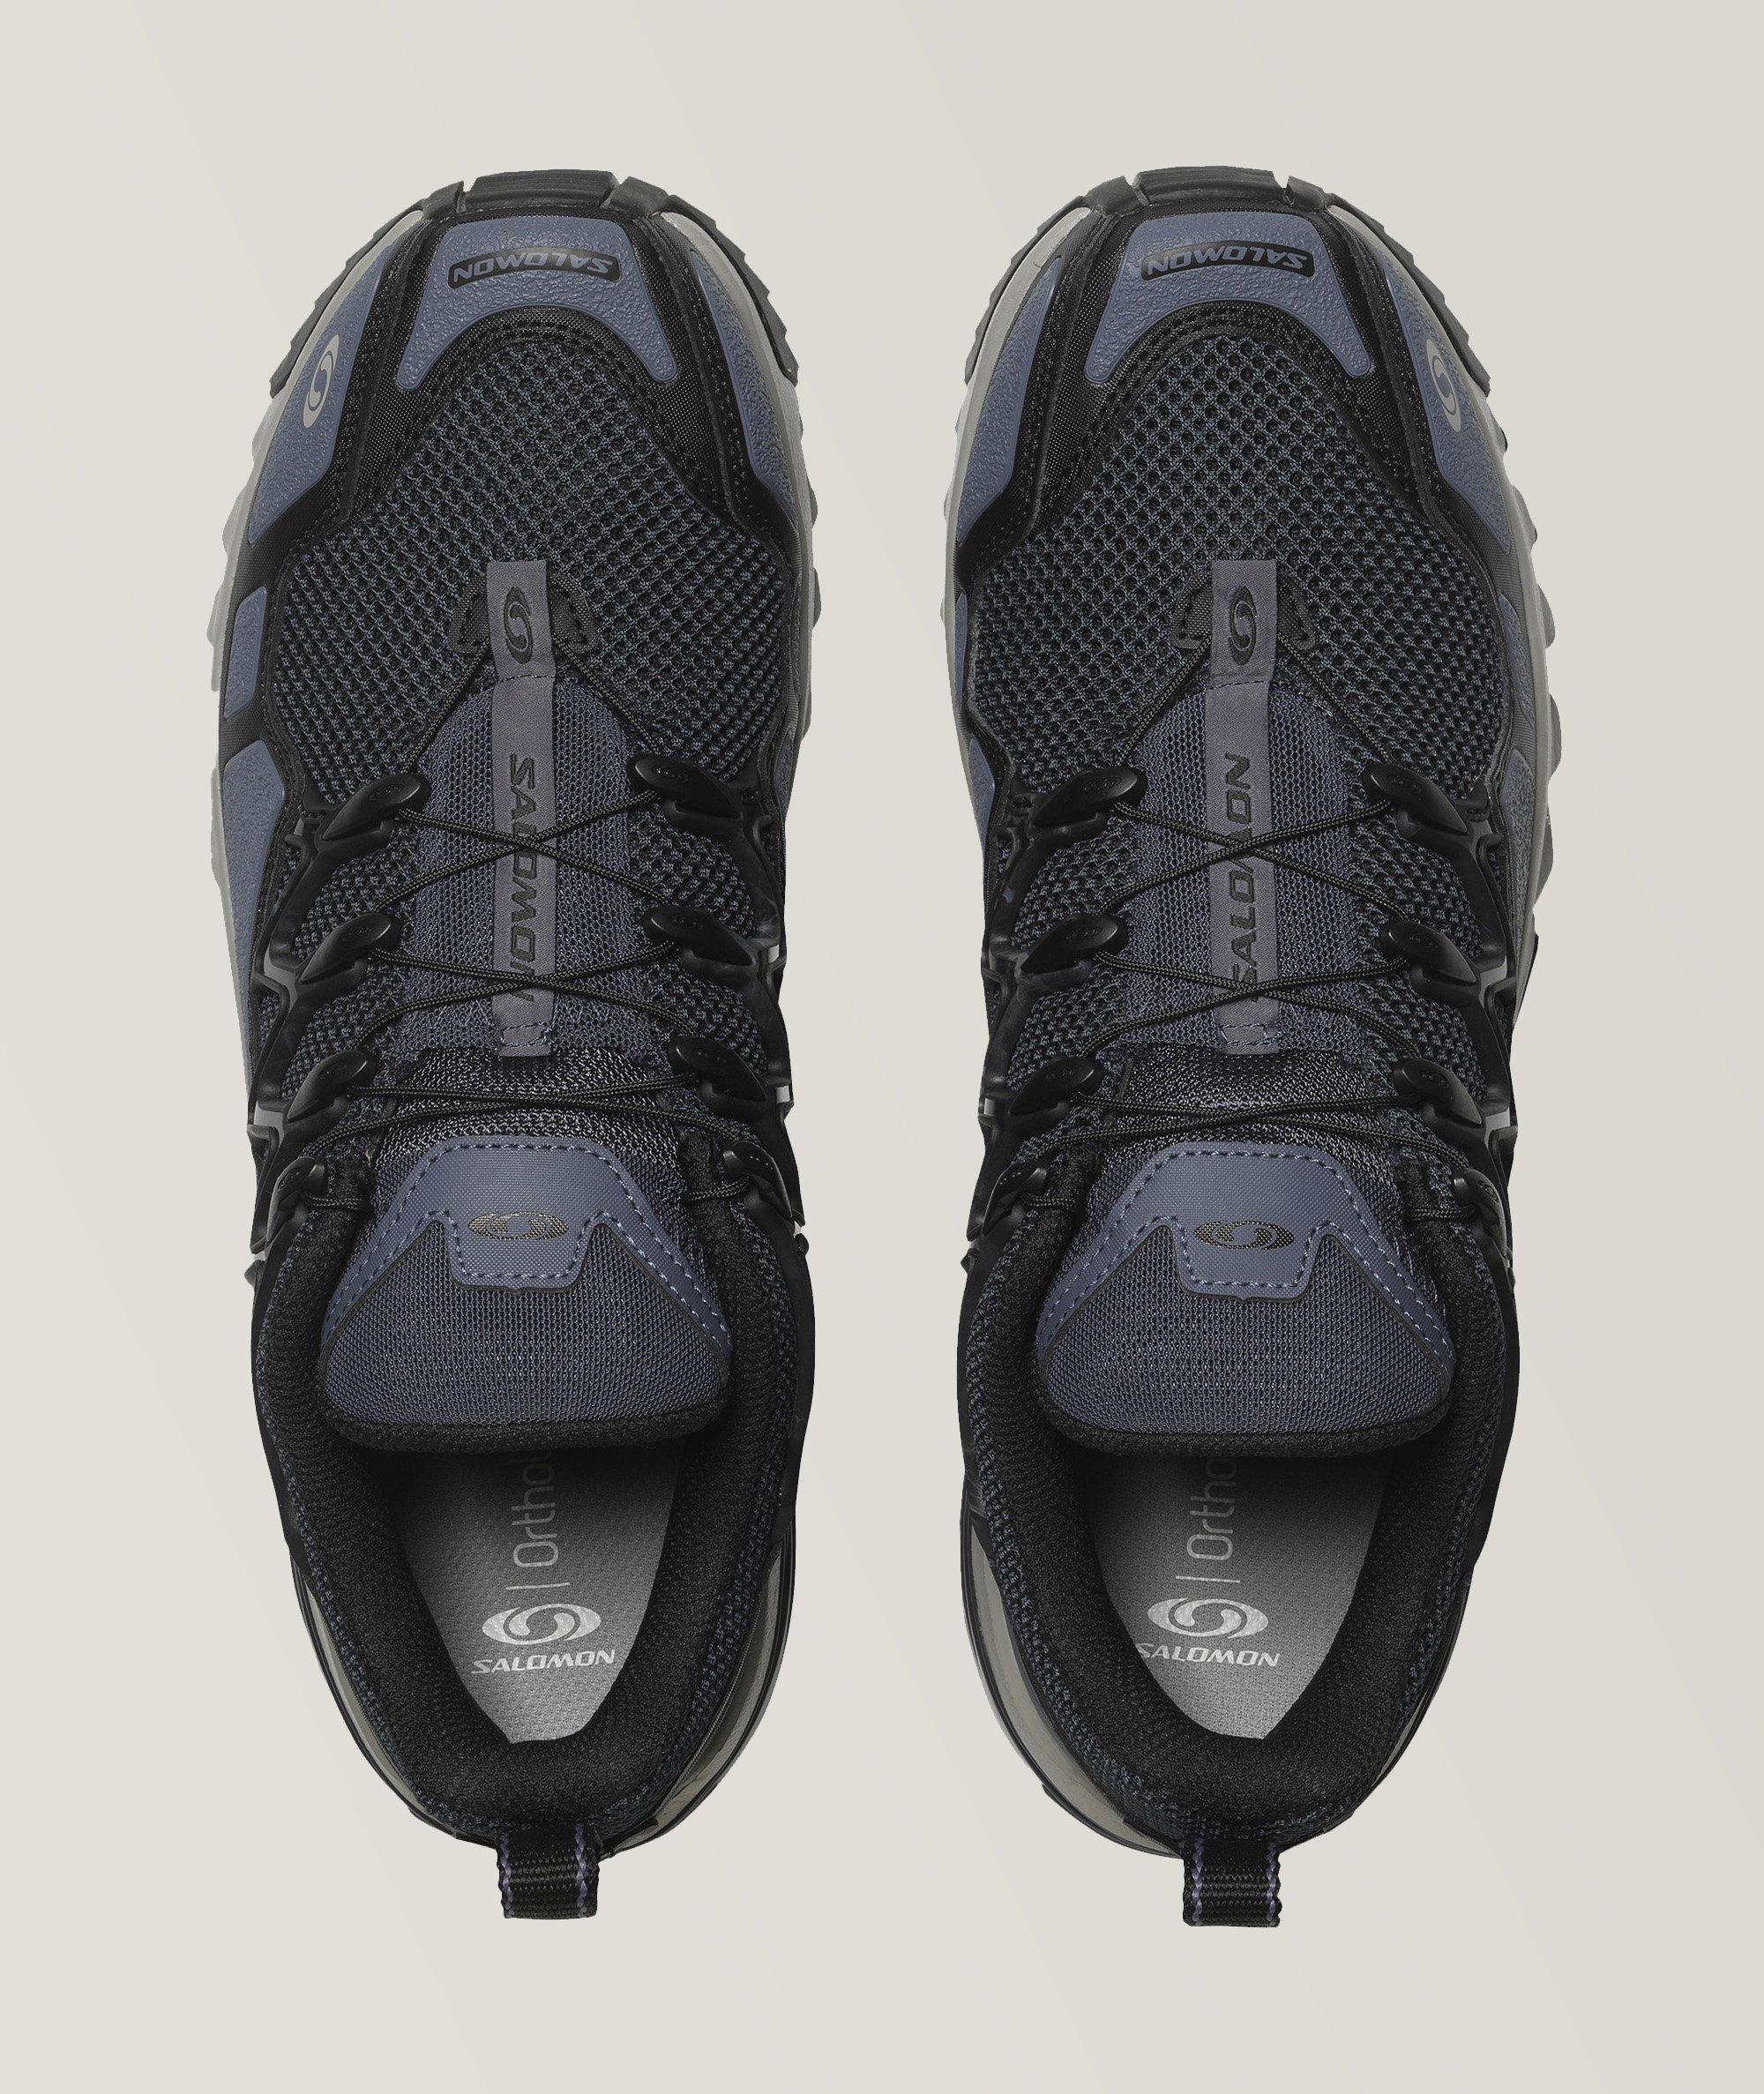 ACS + OG Chassis System Sneakers image 3